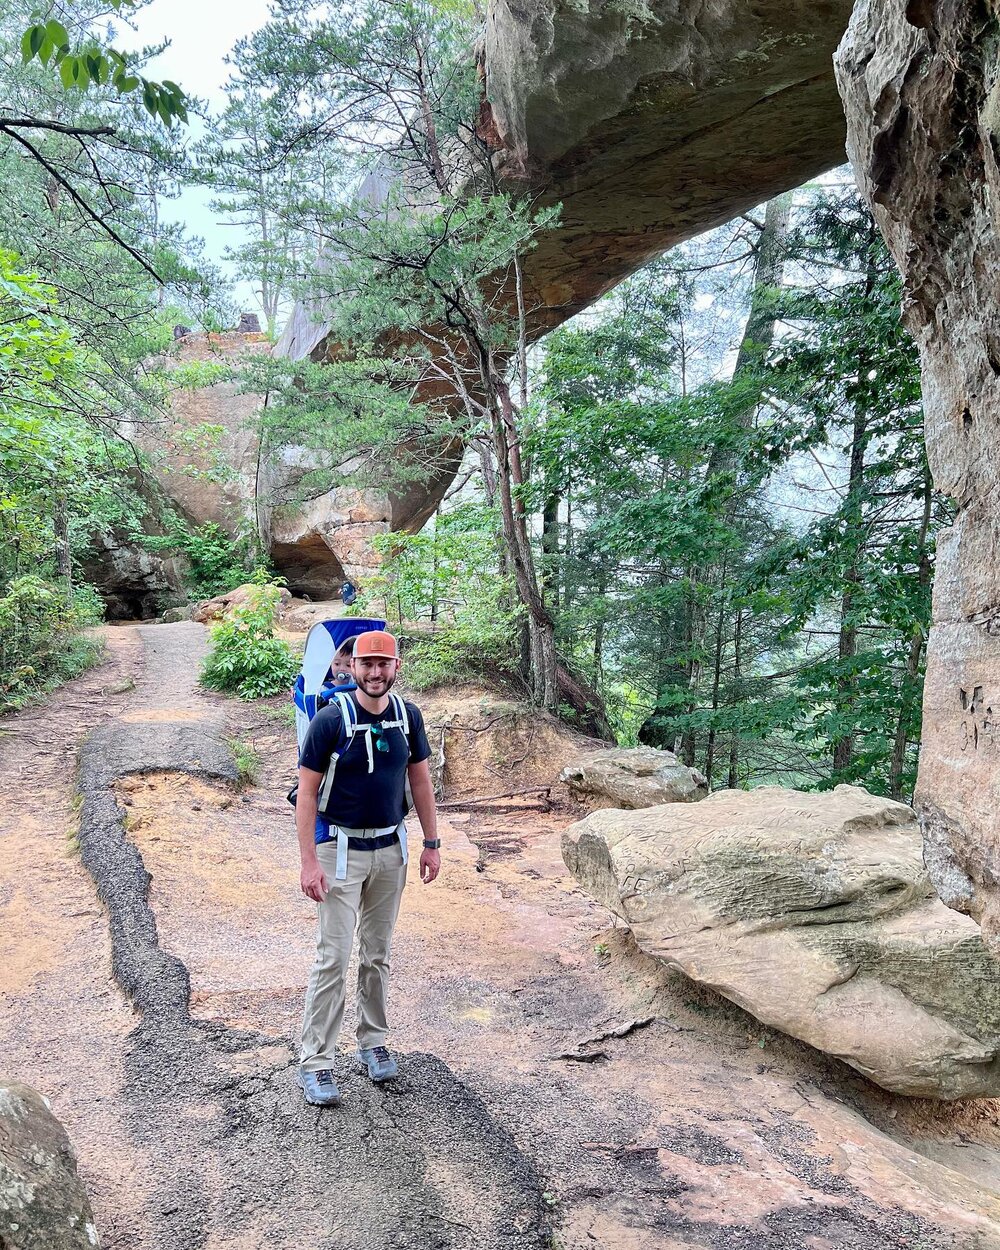 Have you been to The Gorge?  We&rsquo;ve taken a few trips this year to Red River Gorge, Kentucky &amp; we absolutely love this little weekend escape just 2 hours from our hometown of Cincinnati!

Check out our newest posts and itinerary- TheDuhlsDo.